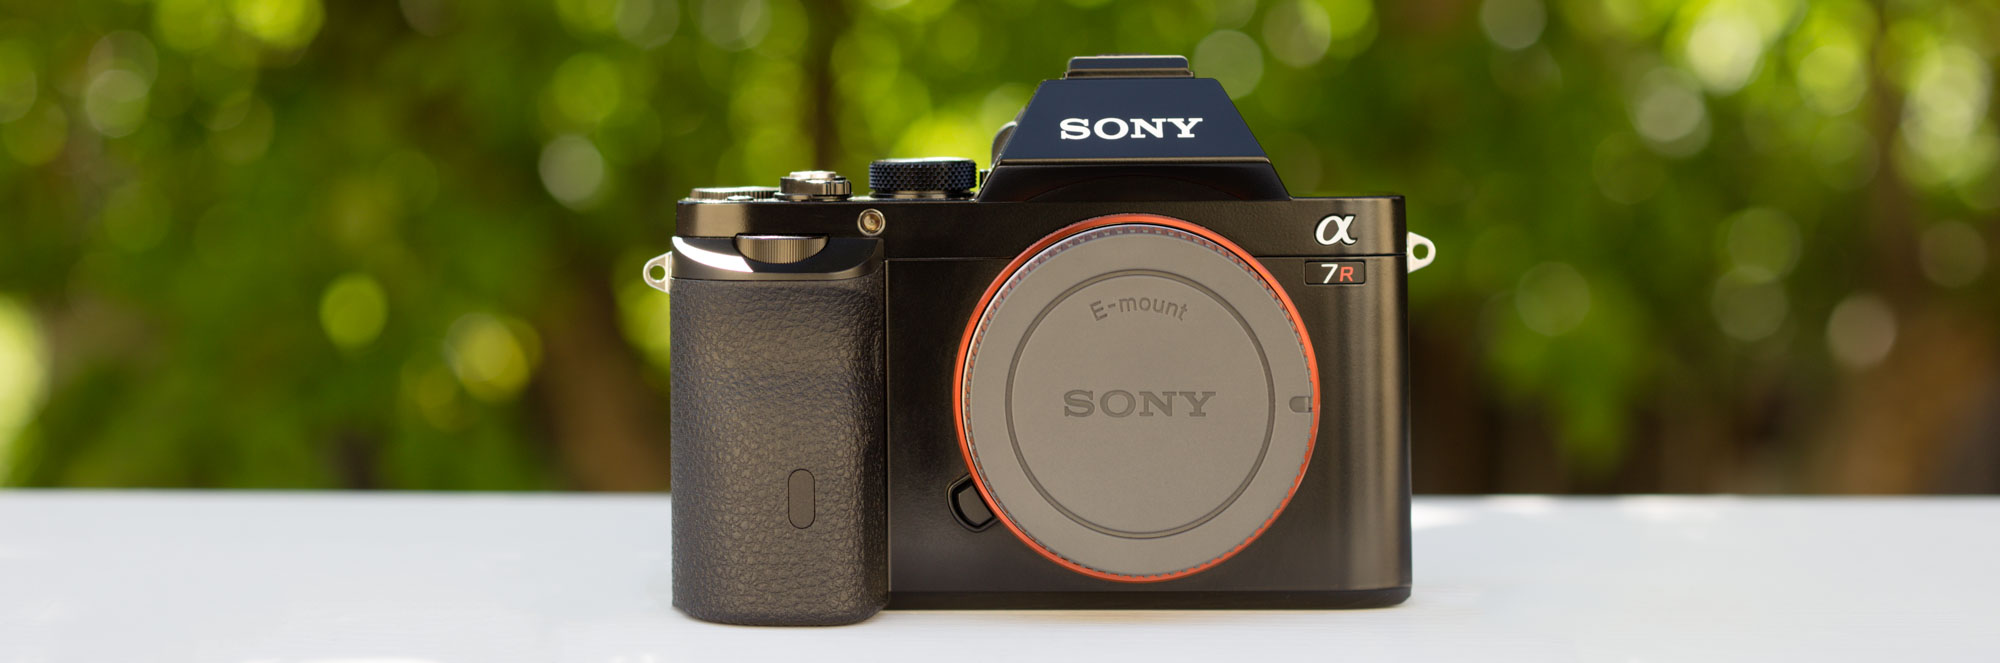 Sony-A7R-Wedding-Photography-Cover